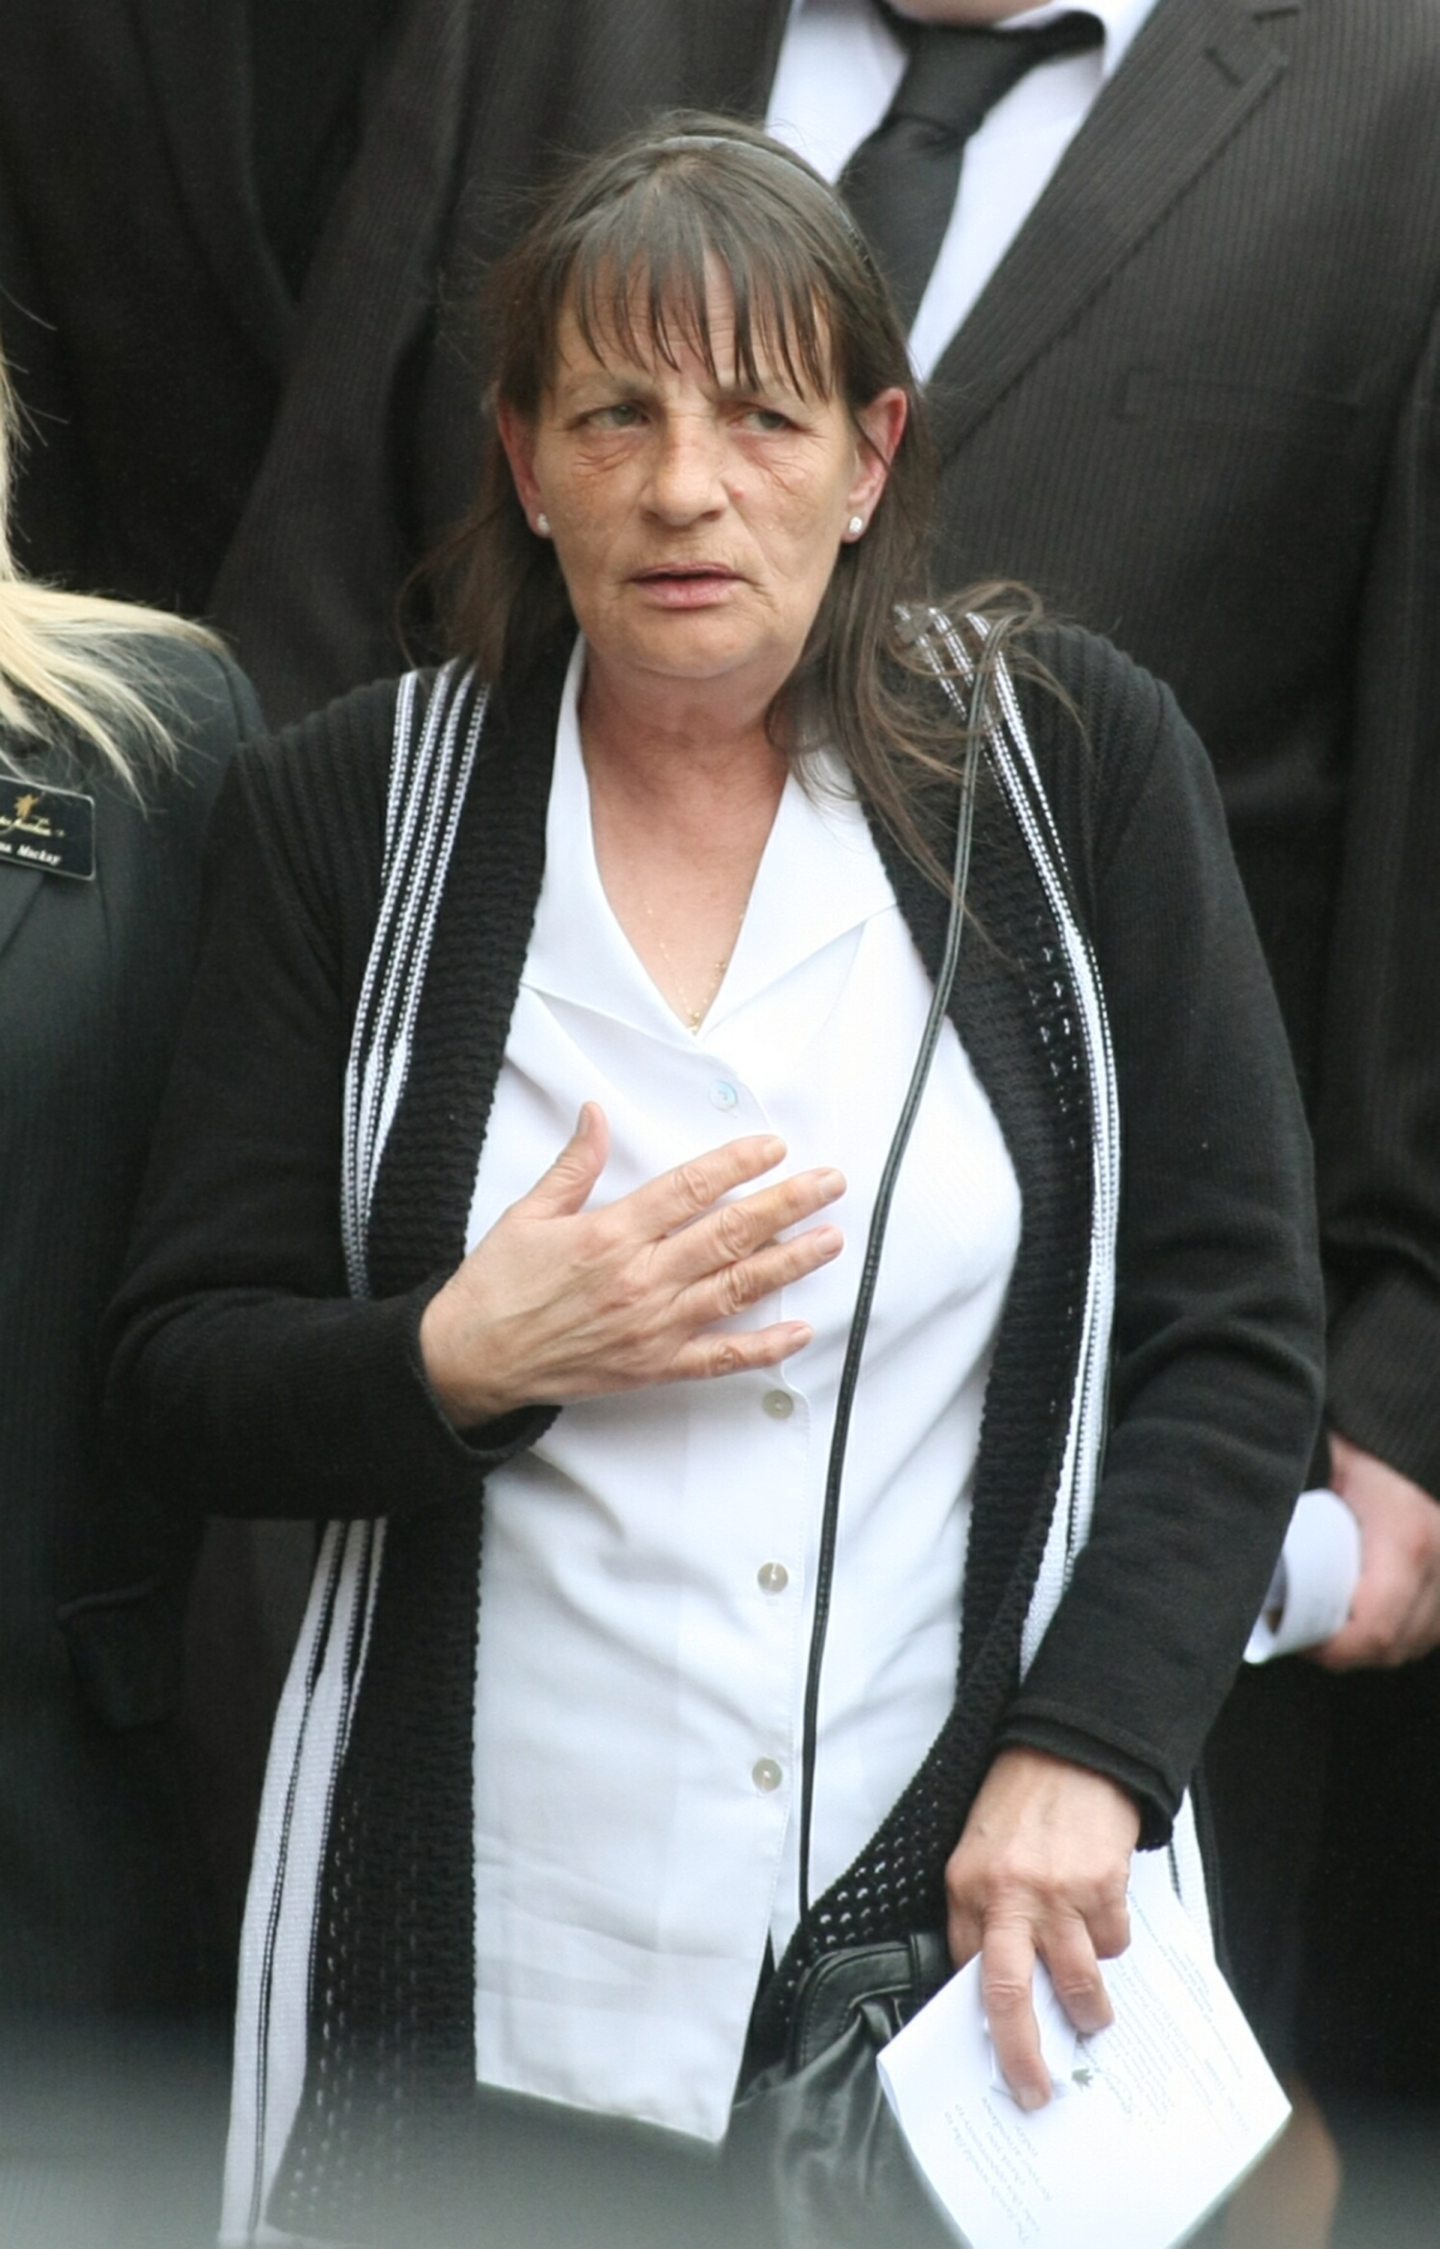 Jocky's widow Malvina at the funeral service for her beloved husband Jocky in 2012.